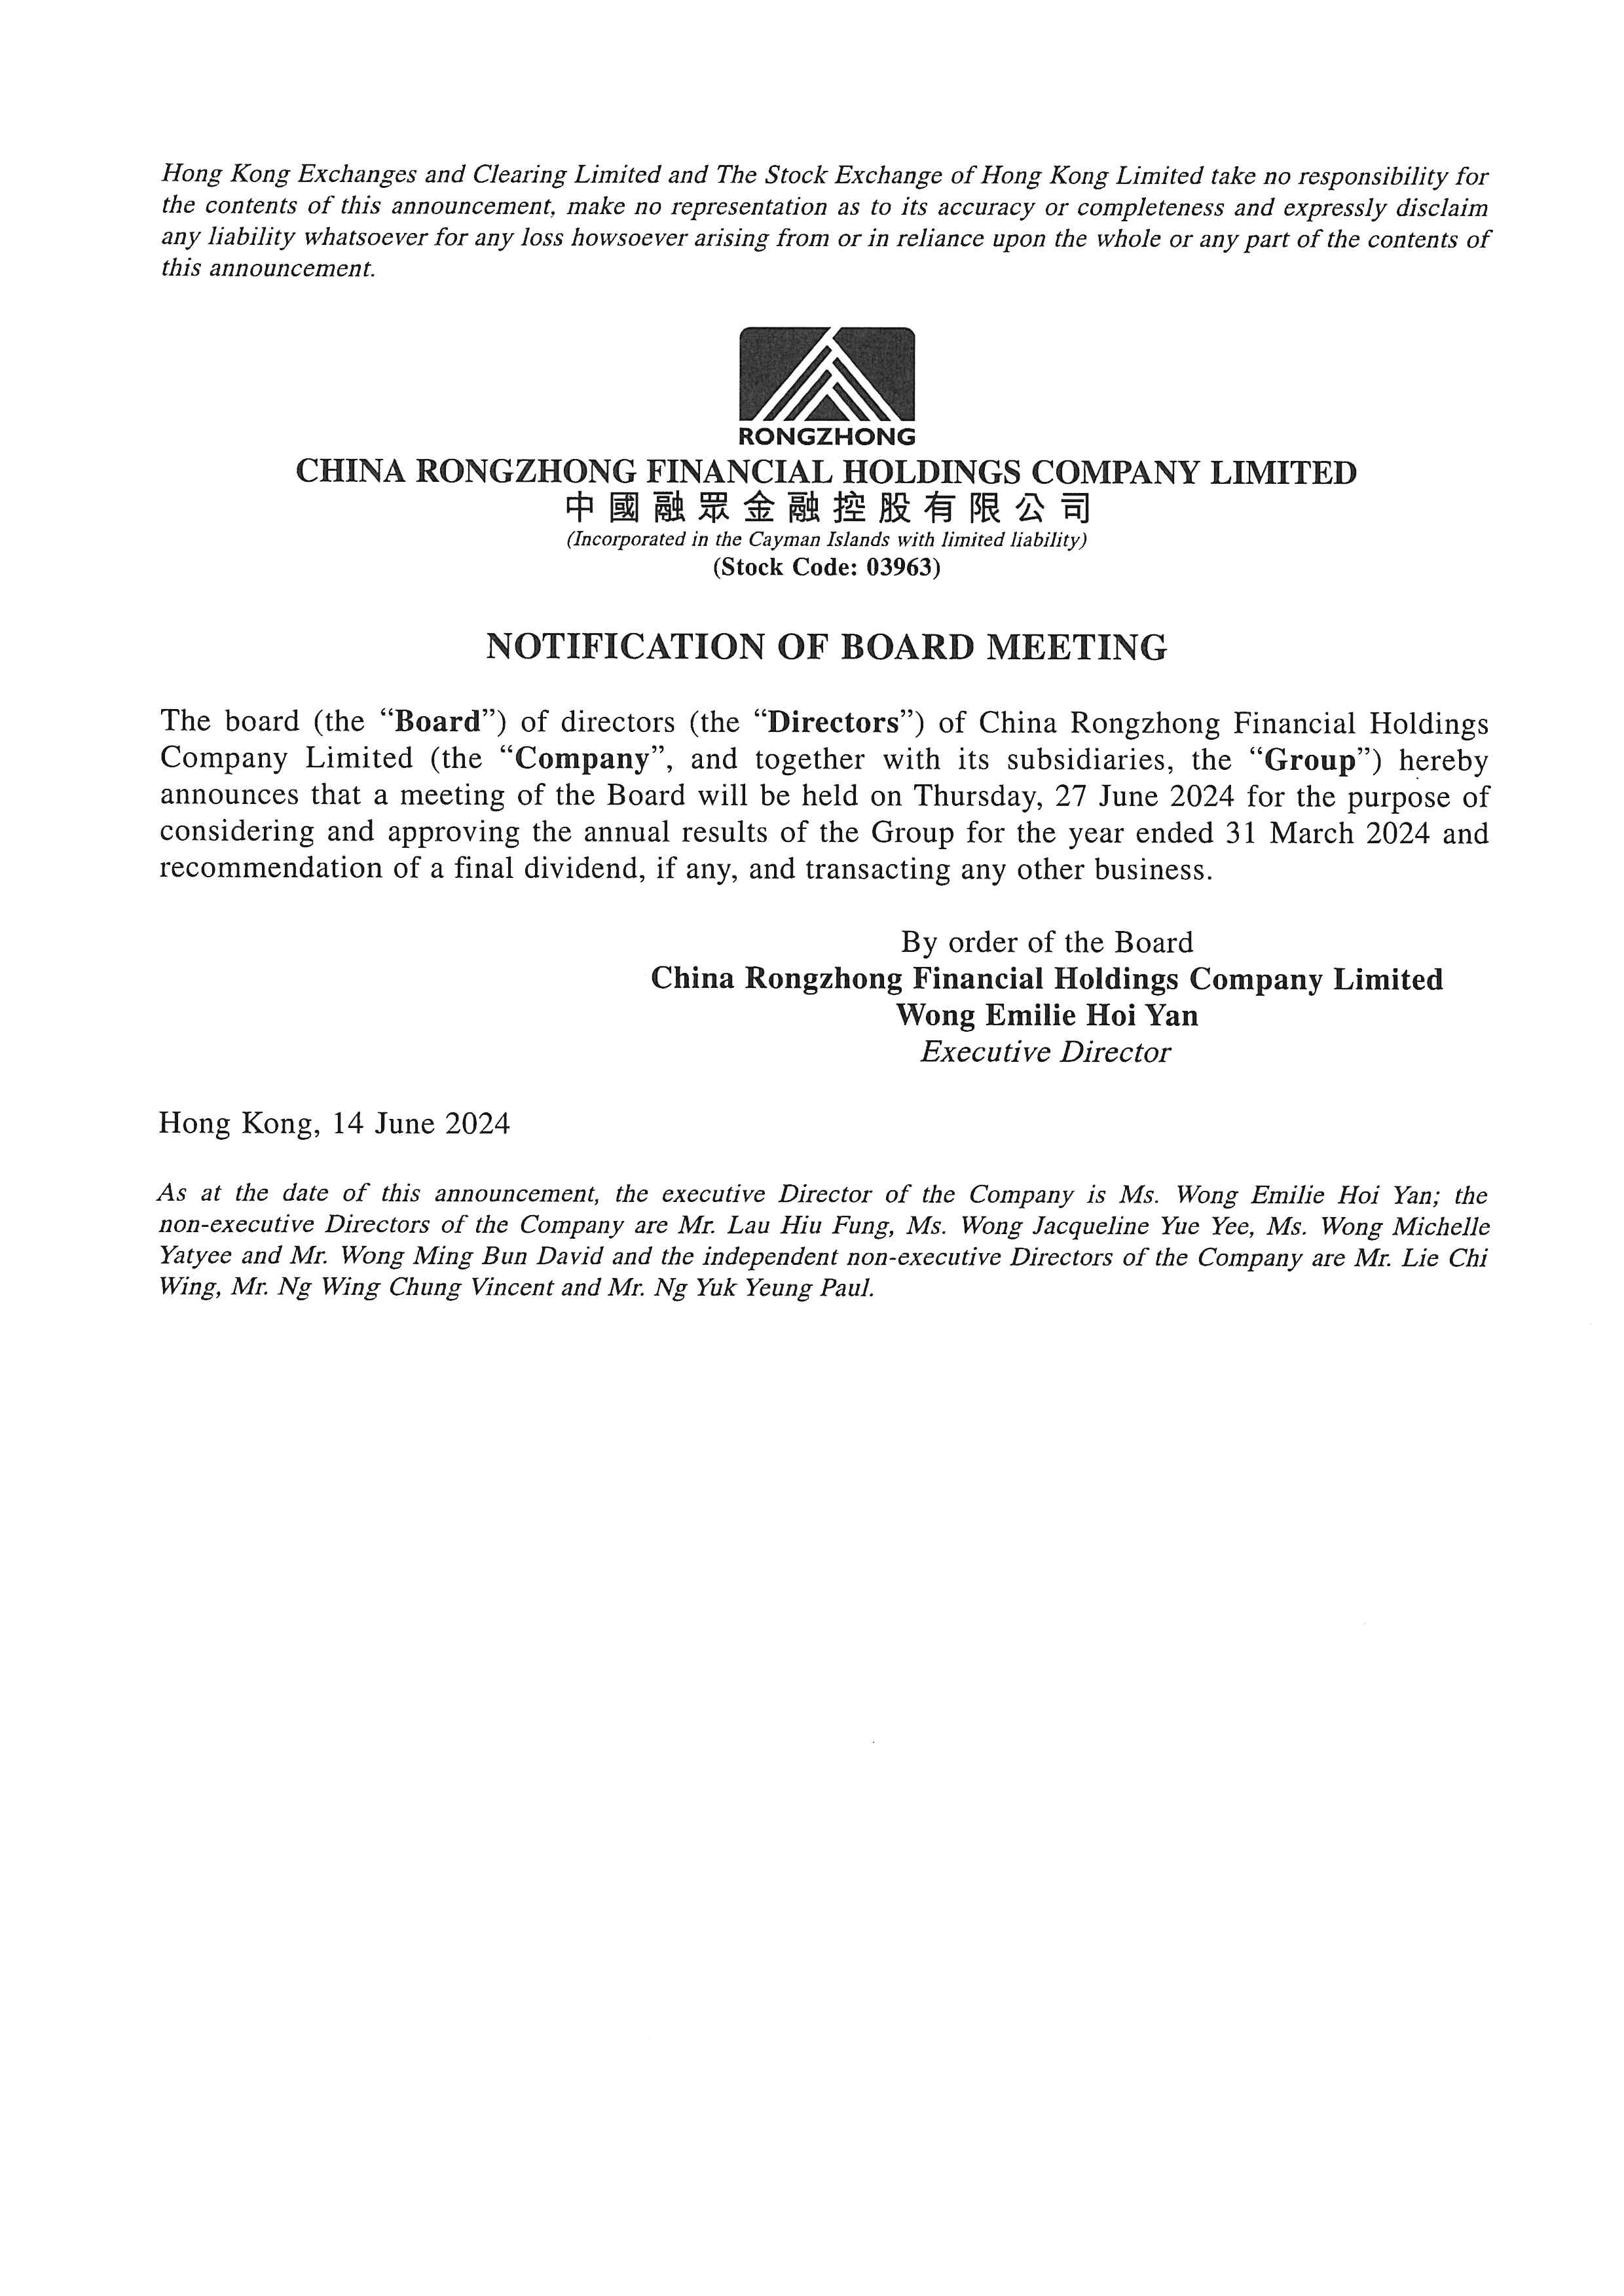 Announcements and Notices - [Date of Board Meeting]